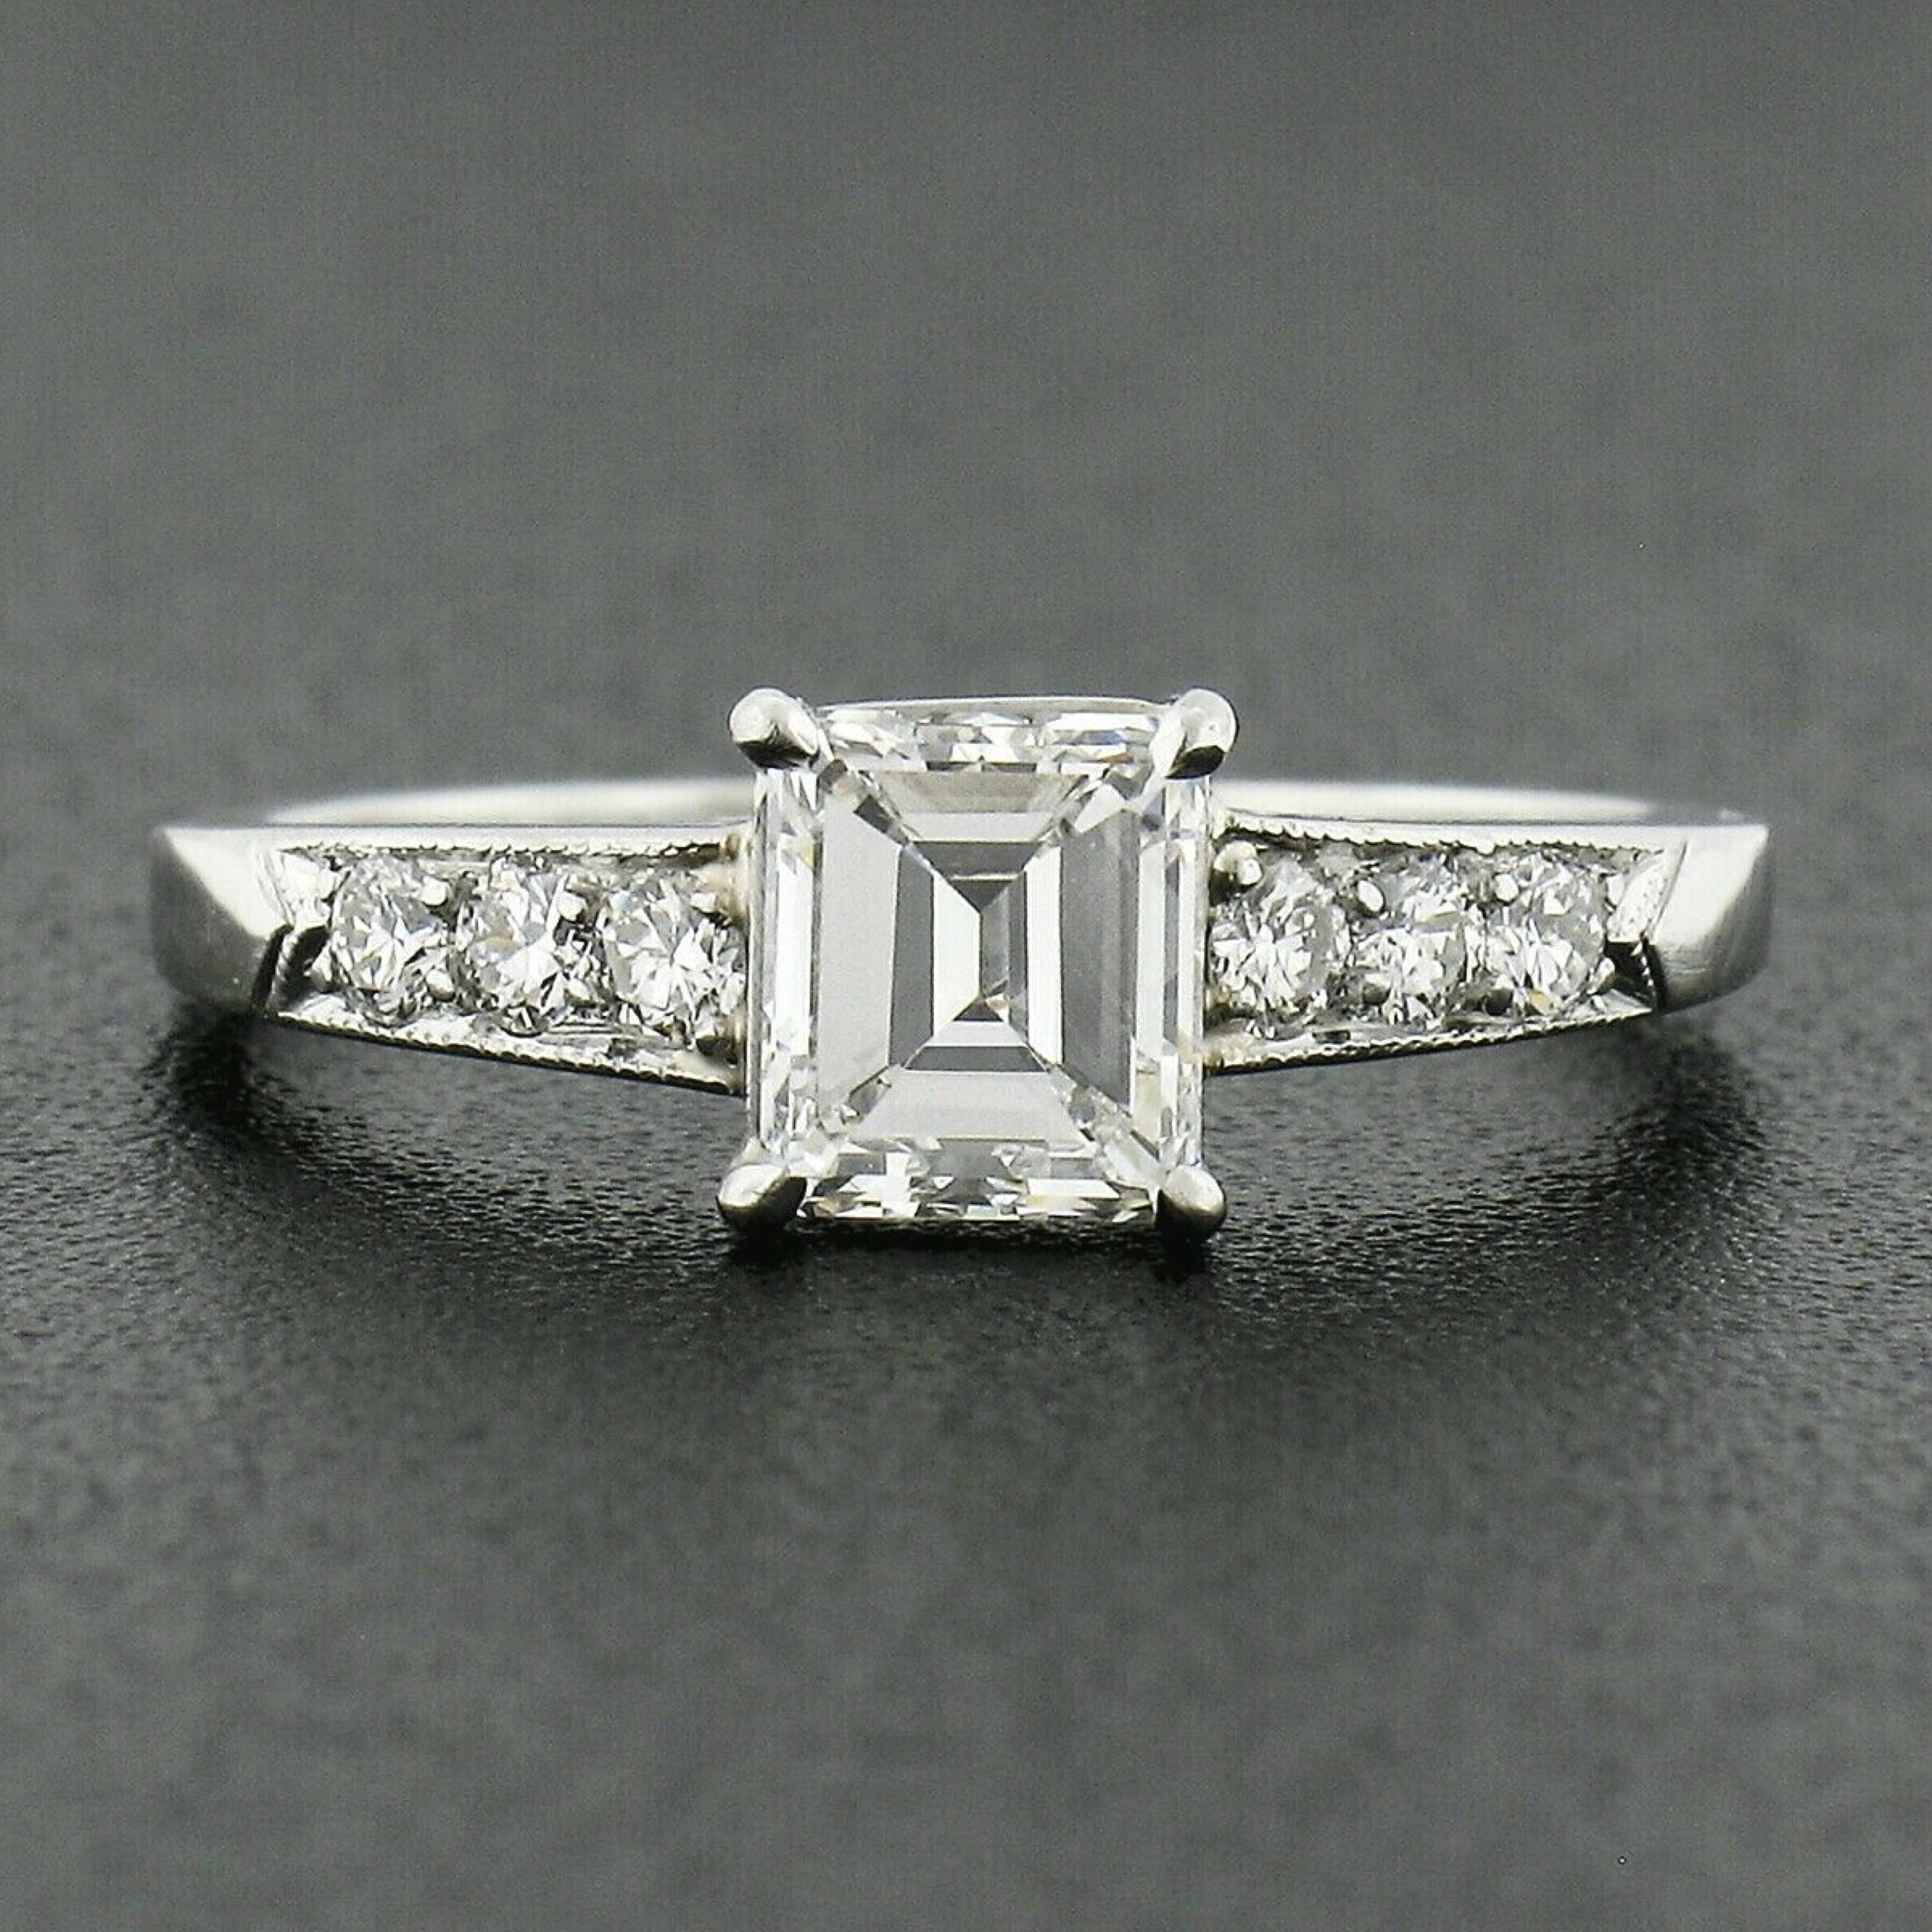 This absolutely gorgeous antique engagement ring was crafted during the art deco period from solid platinum and features a TOP QUALITY emerald cut diamond solitaire neatly prong set at its center. This stunning old stone is GIA certified as weighing